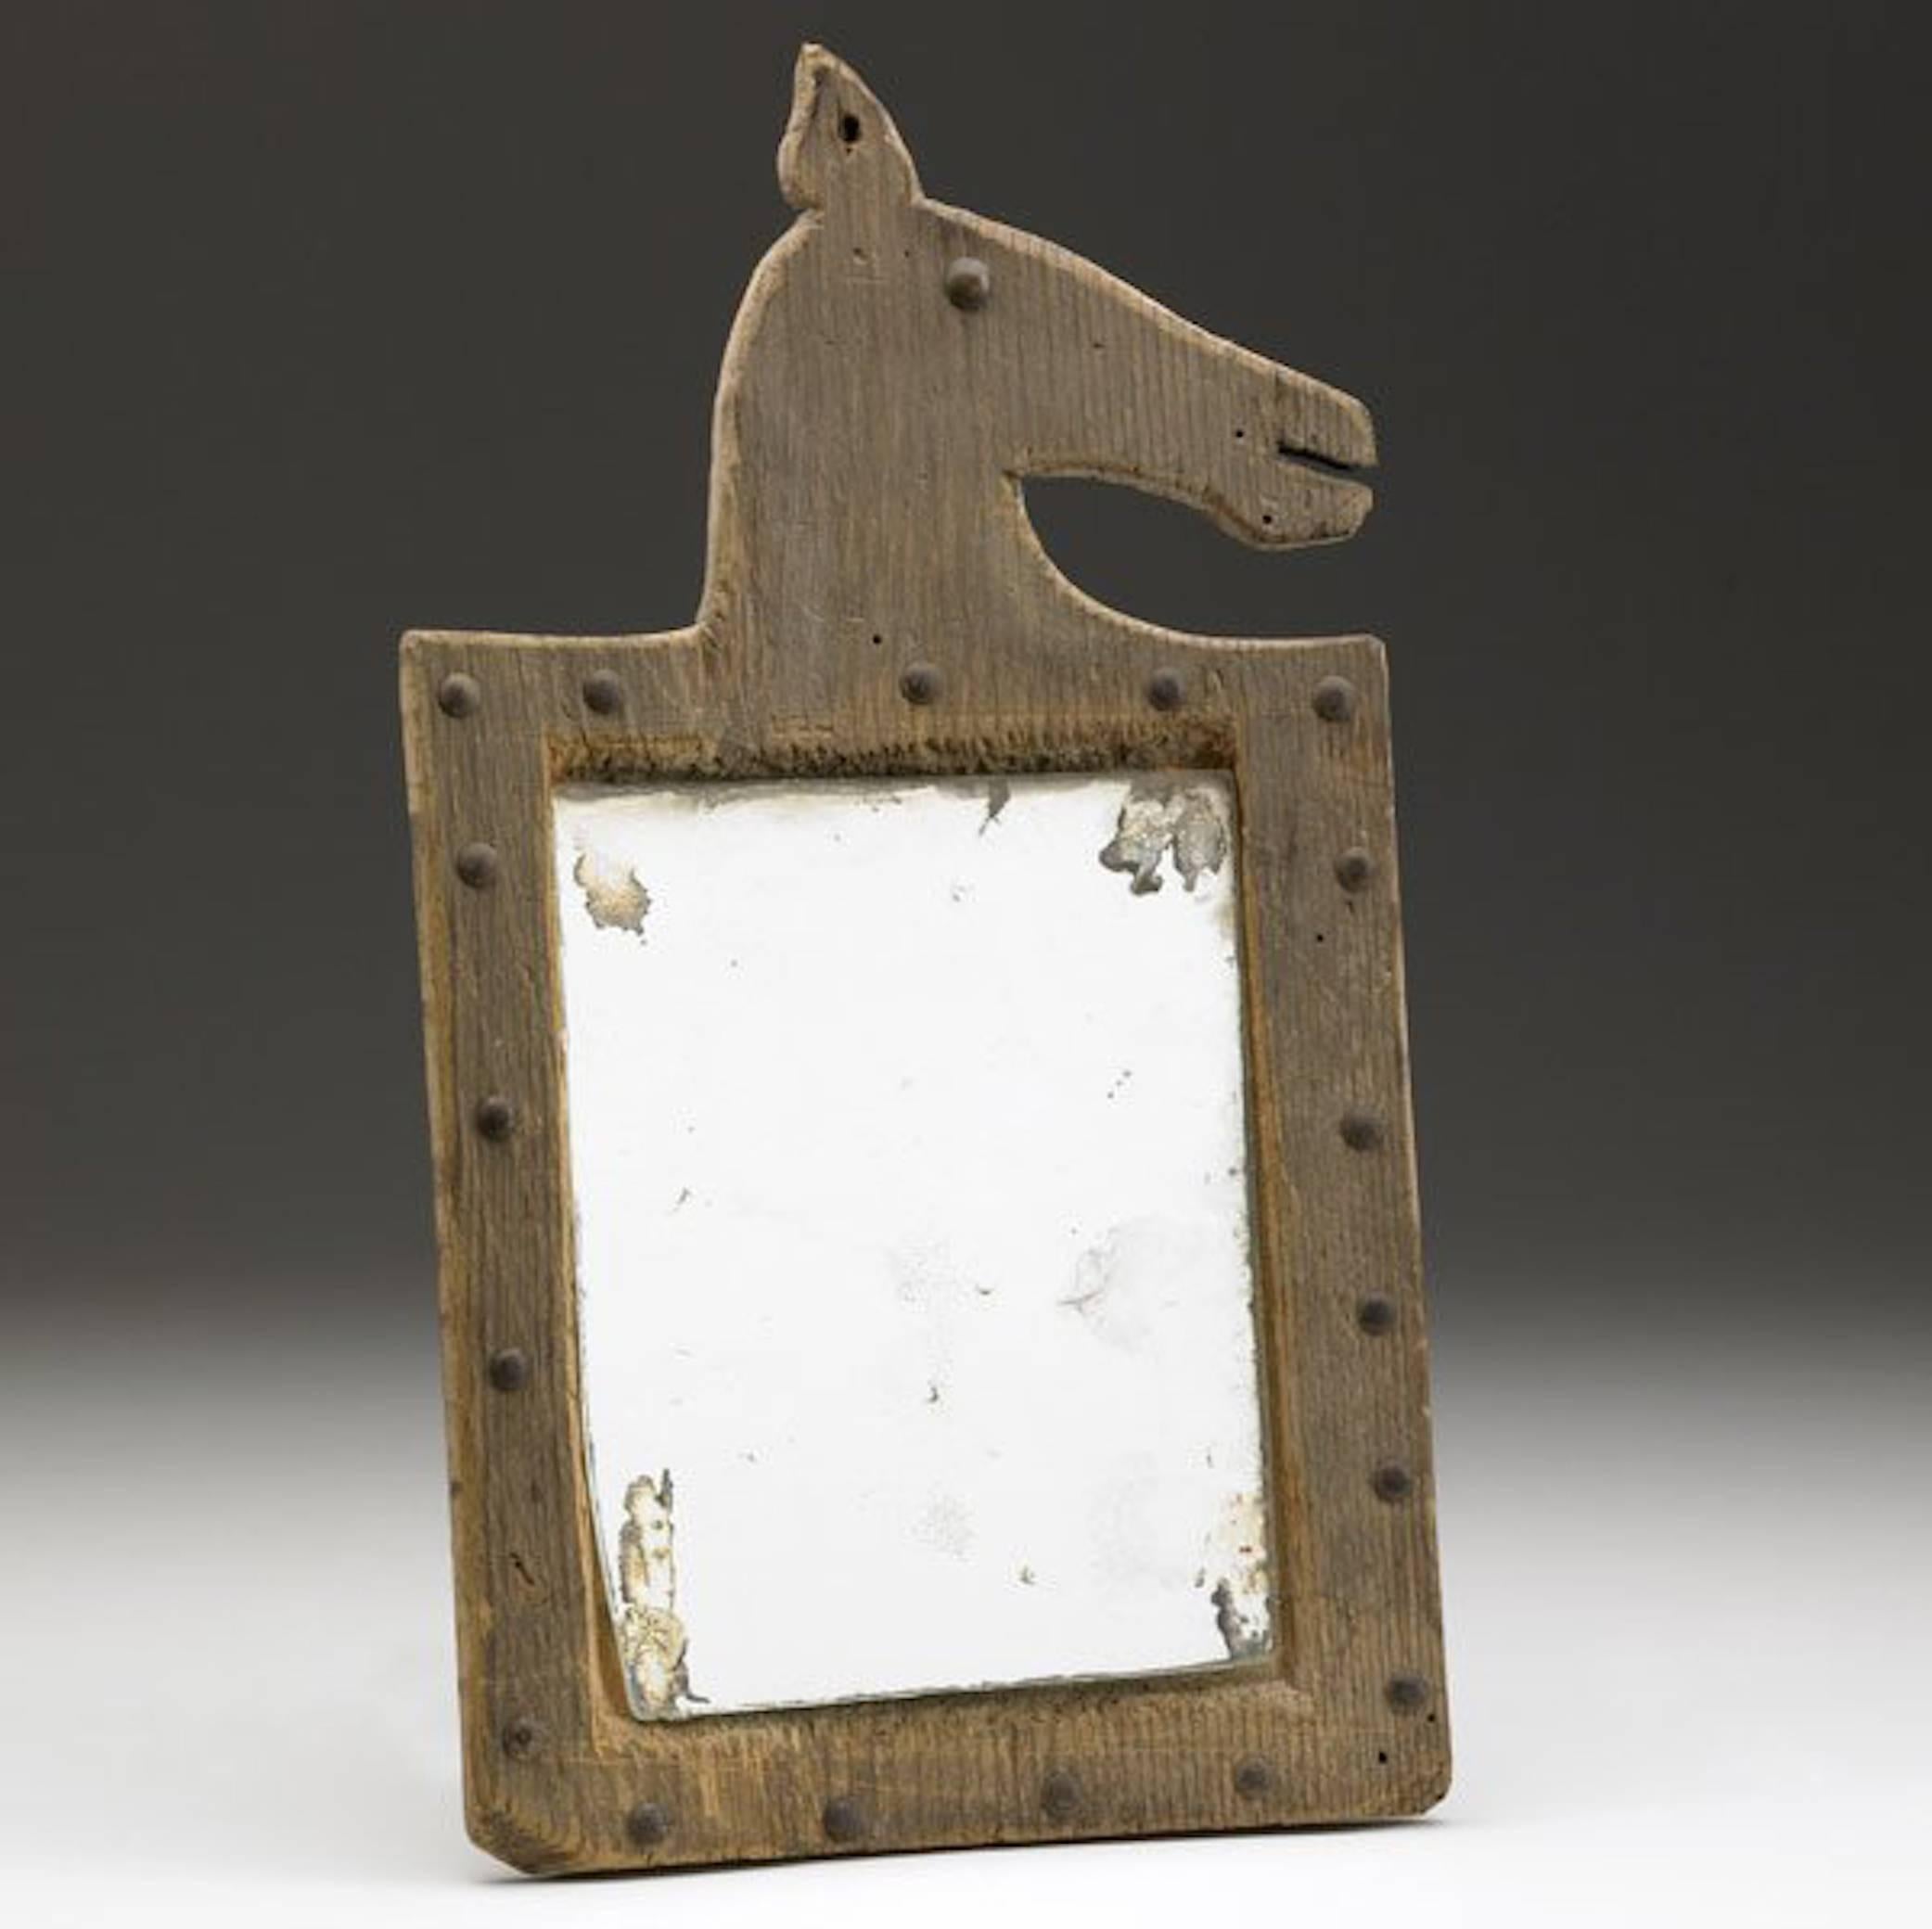 Folk Art "horse effigy mirror" by American artist, Alan Kessler, 1987; inspired by American Indian effigy art pieces. 

Provenance: 
Rago Auctions, Owners: Miriam Tucker, David Rago
Date(s) Sold by Rago Auctions: 
-April 25, 2014; Lot 493